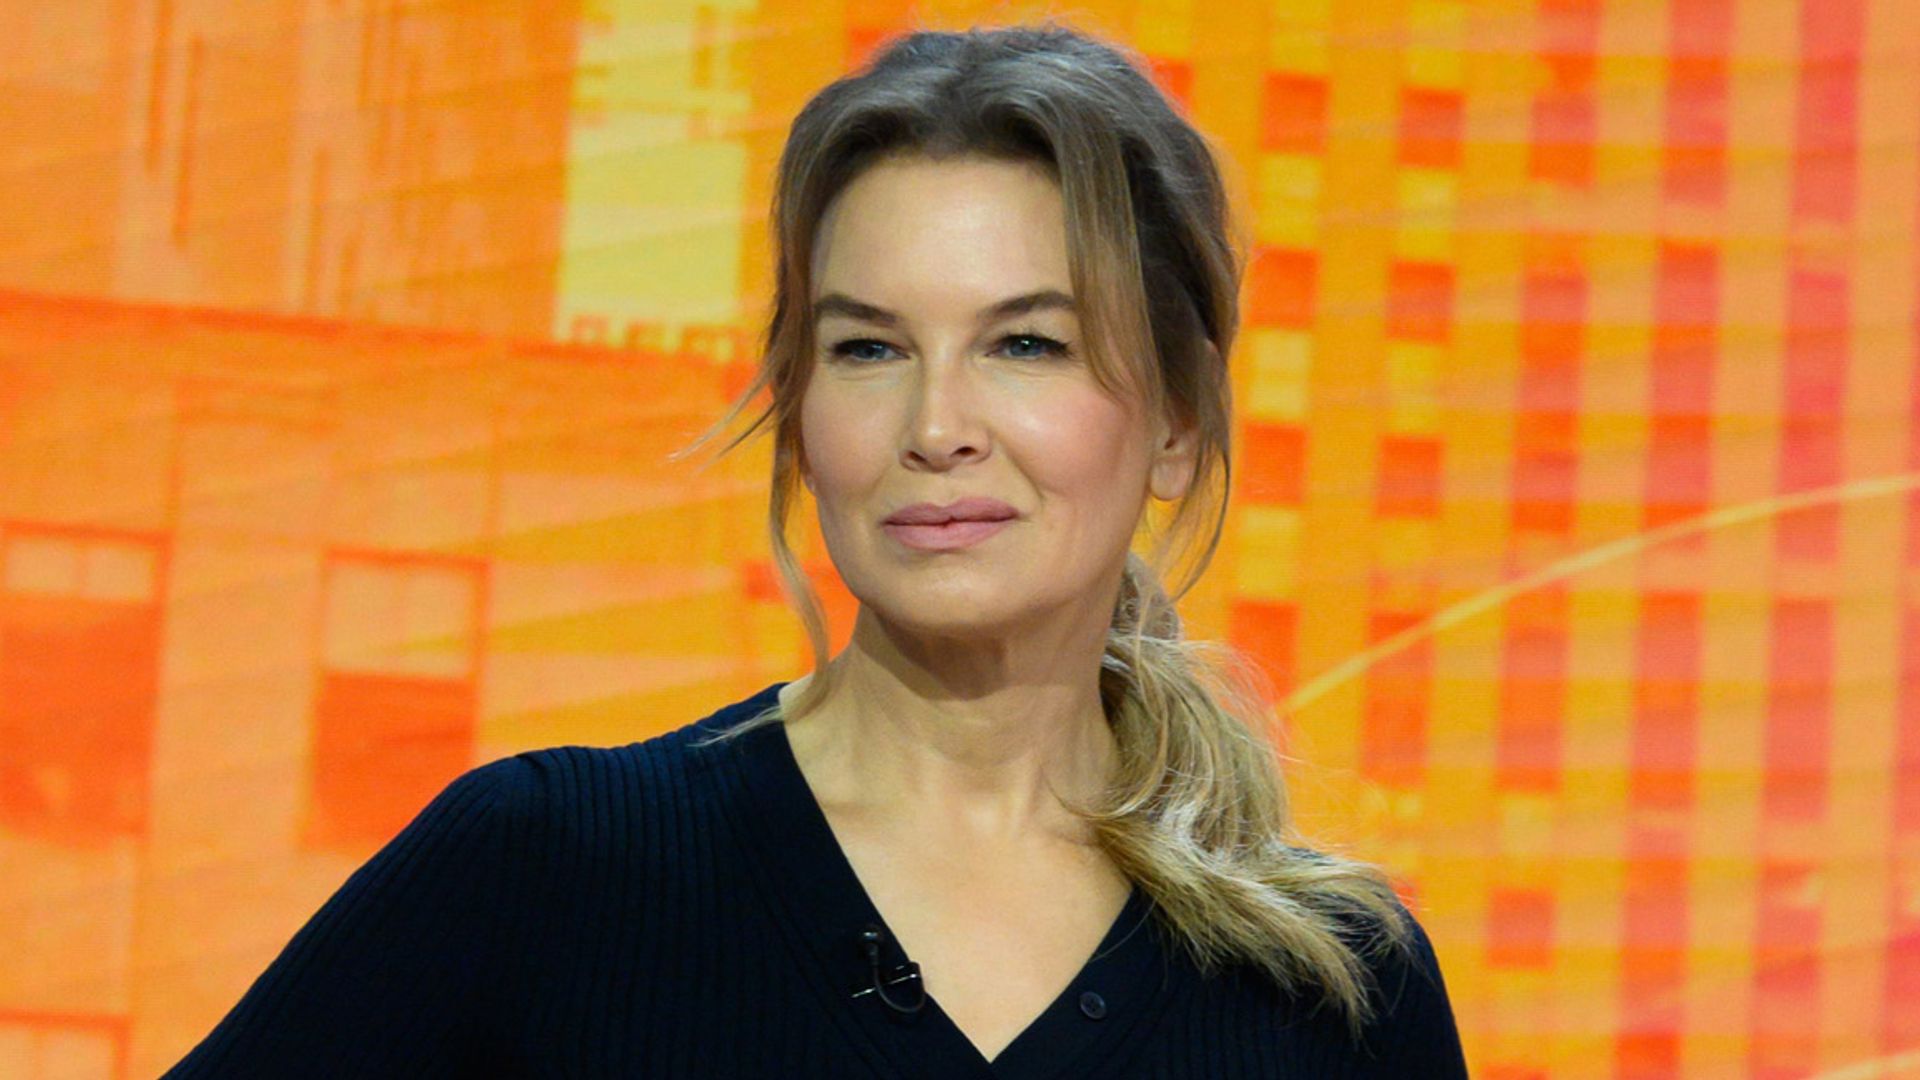 Renee Zellweger's unrecognizable hairstyle in throwback photo will make you look twice